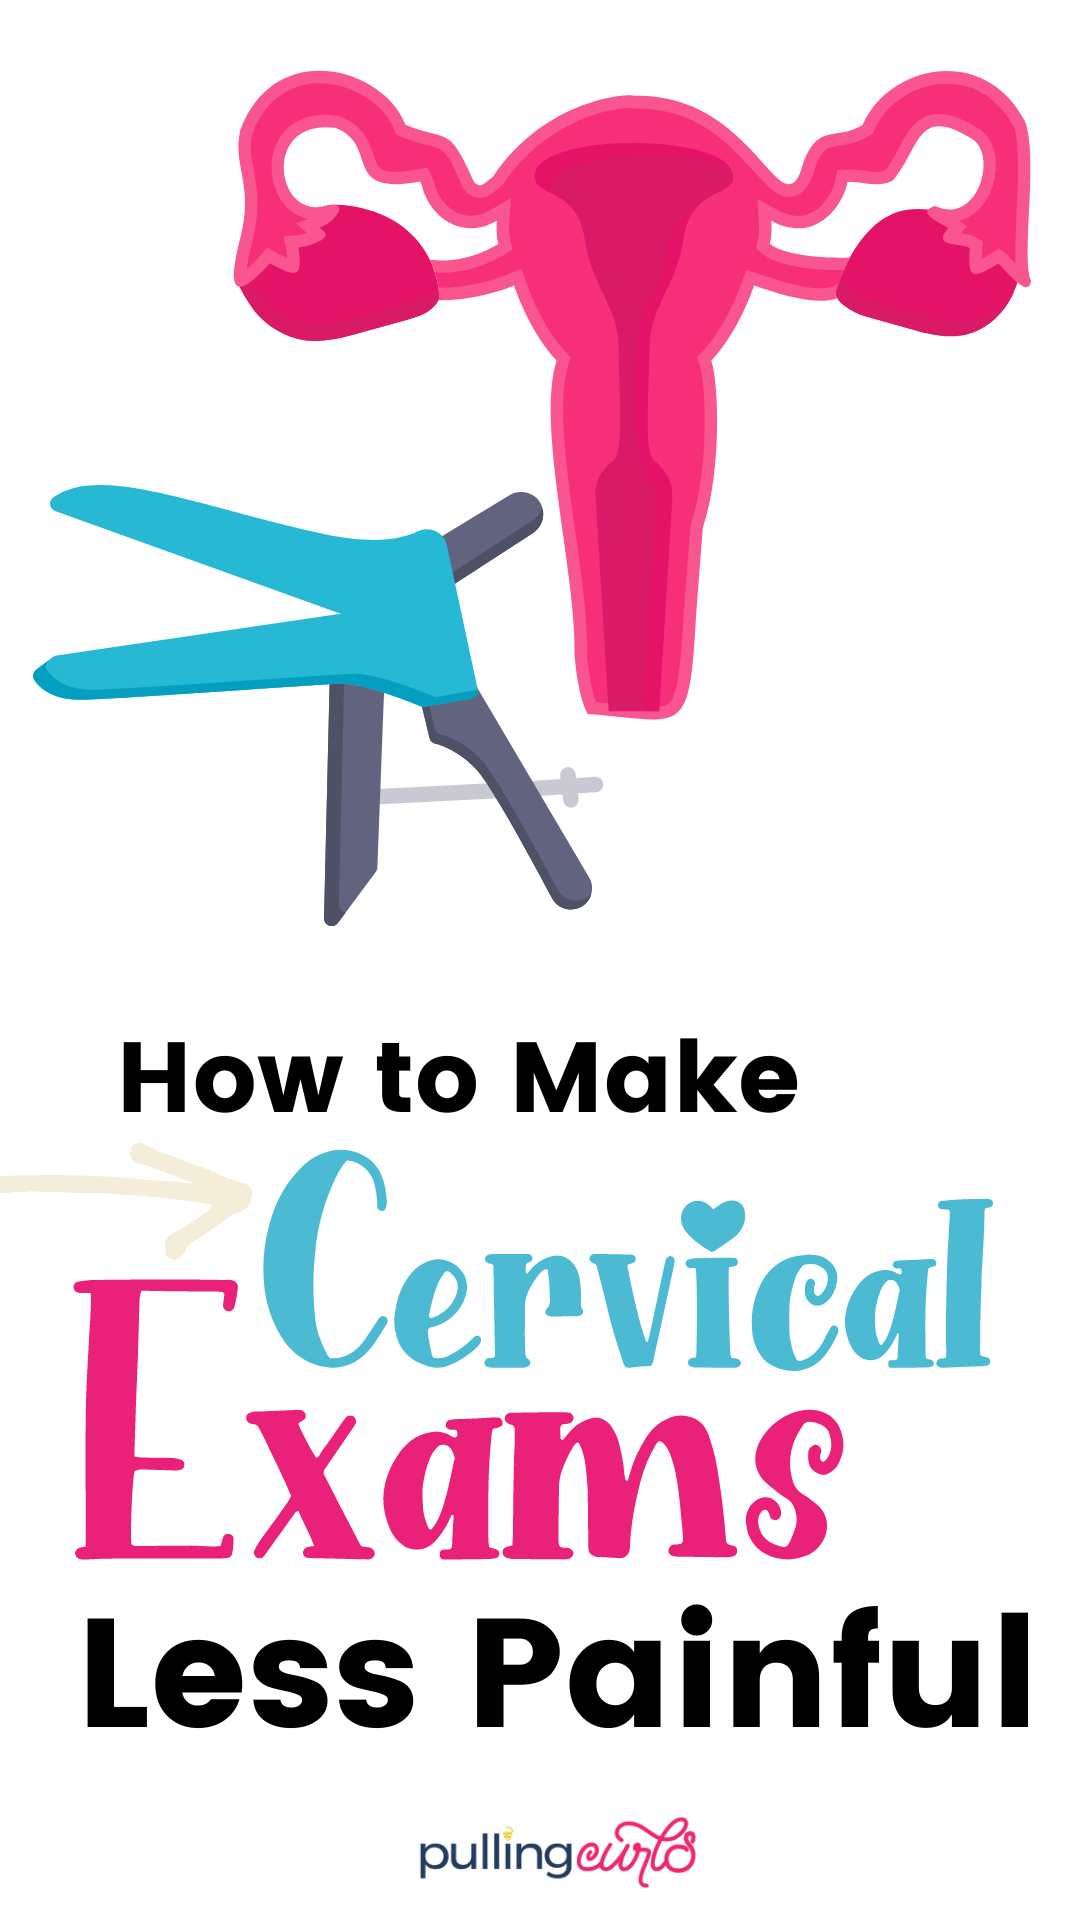 Internal vaginal or cervical exams aren't something that any woman looks forward to, but many women find internal exams during pregnancy almost intolerable because of the pain. Let's talk about why they are so painful and what you can do to make cervical checks easier to handle. via @pullingcurls